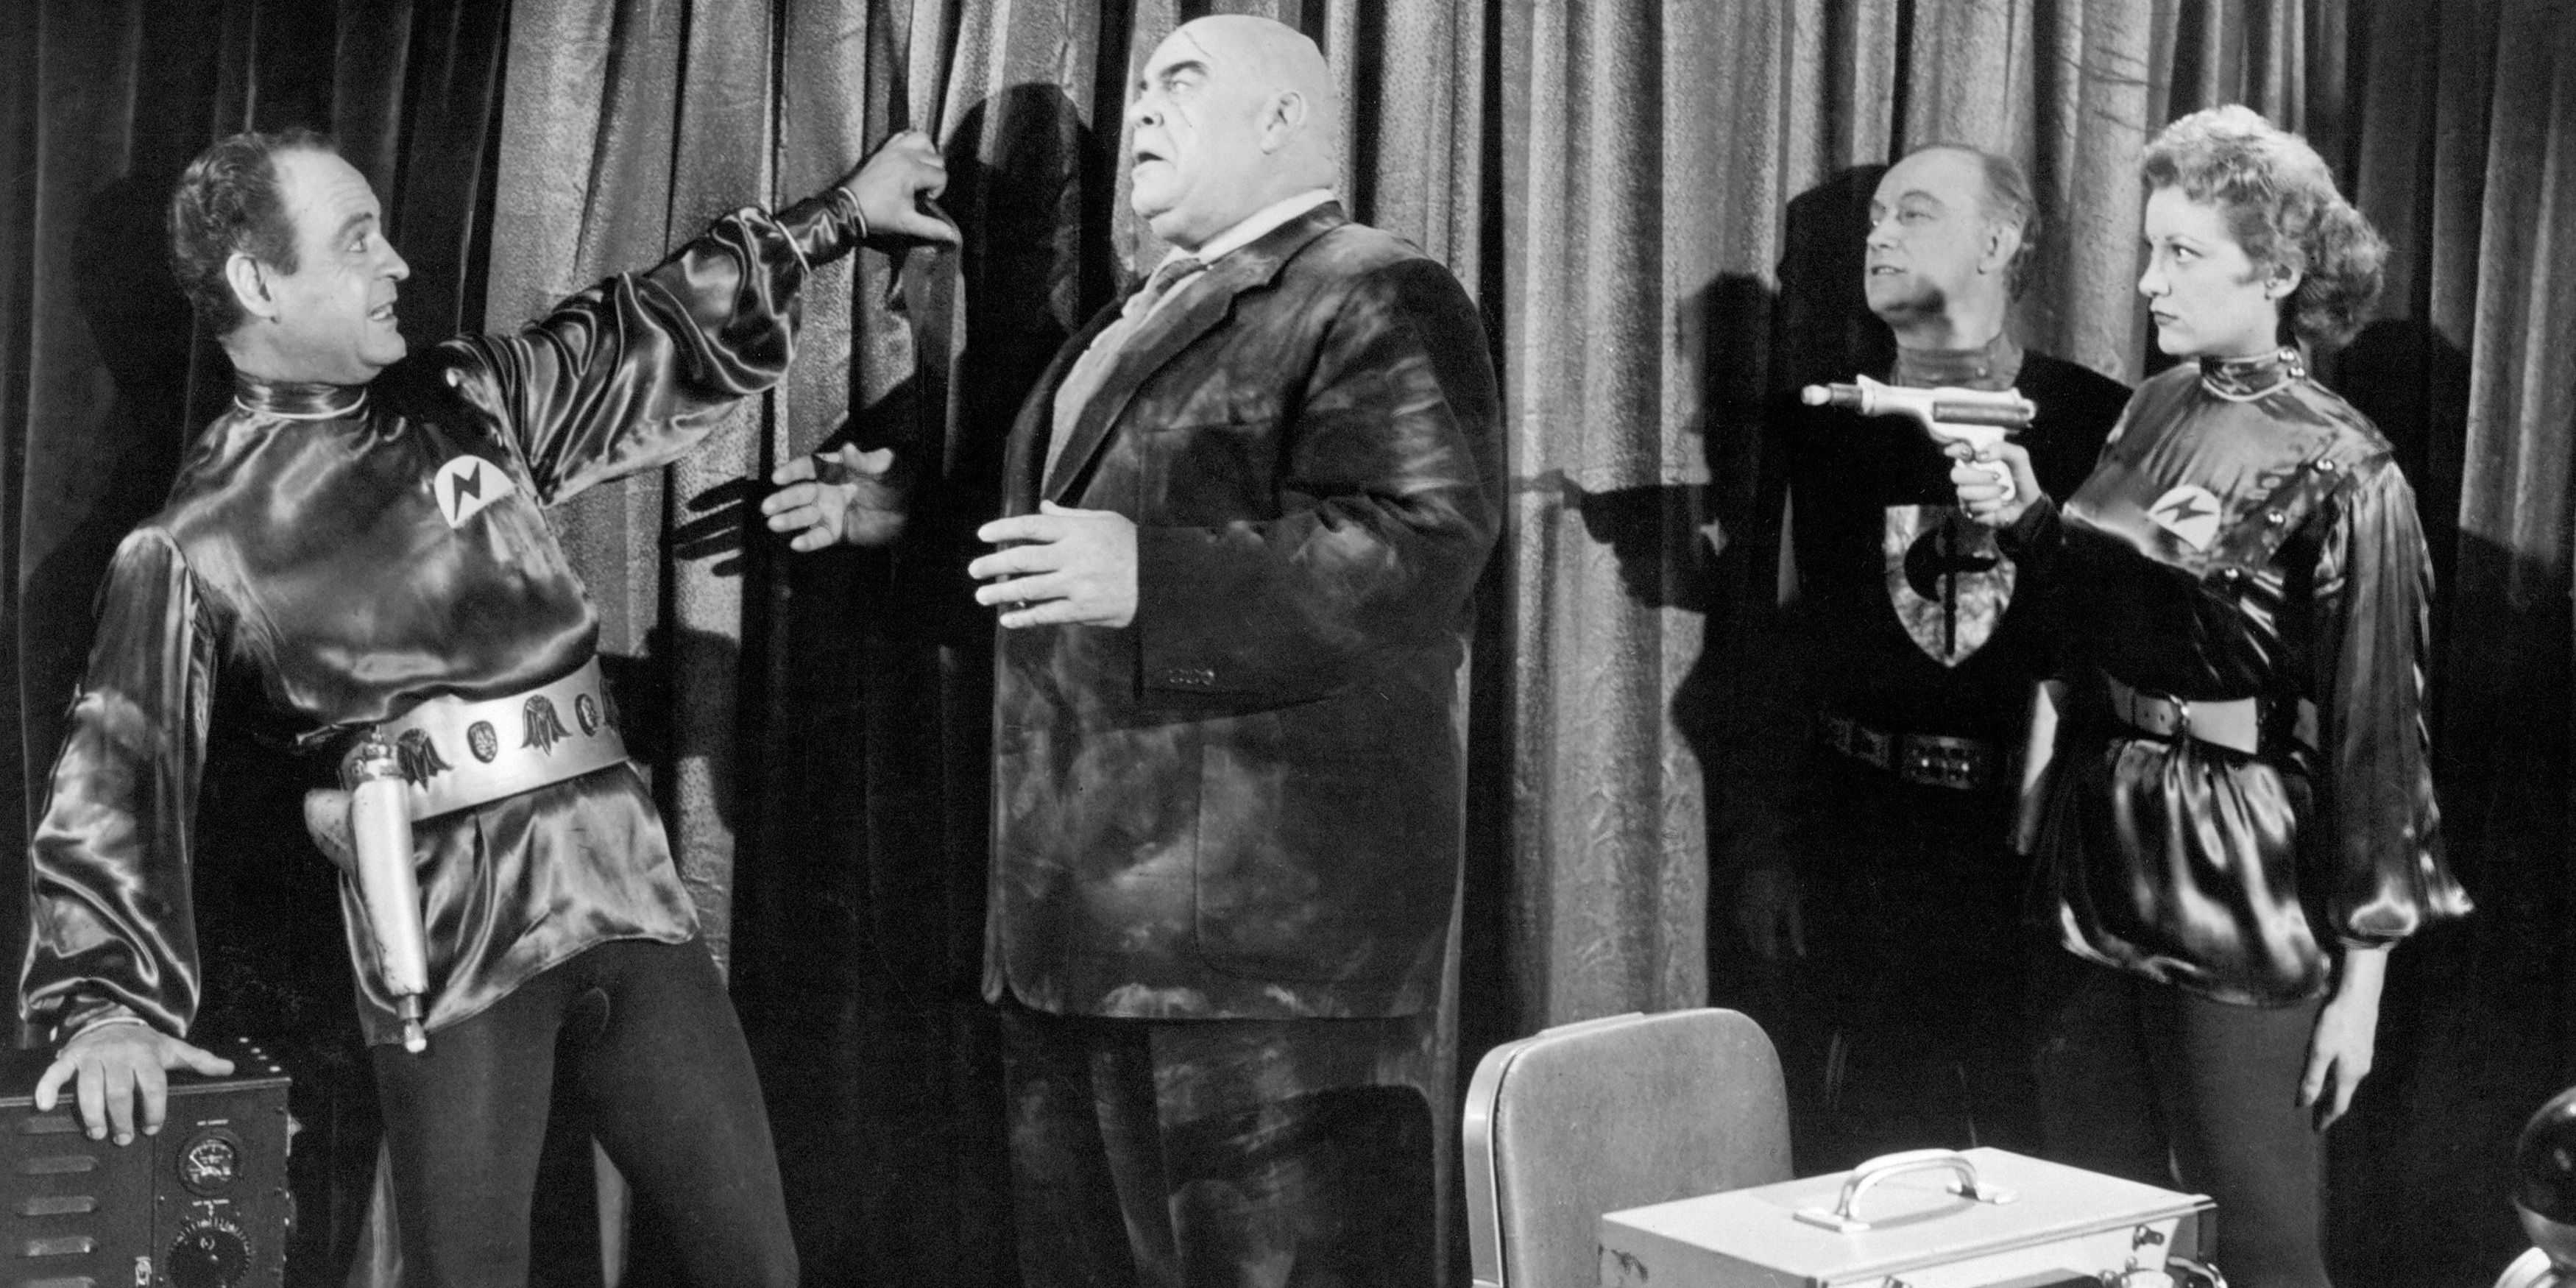 Plan 9 From Outer Space, aliens, tor johnson, ray guns, ed wood, mauvais films